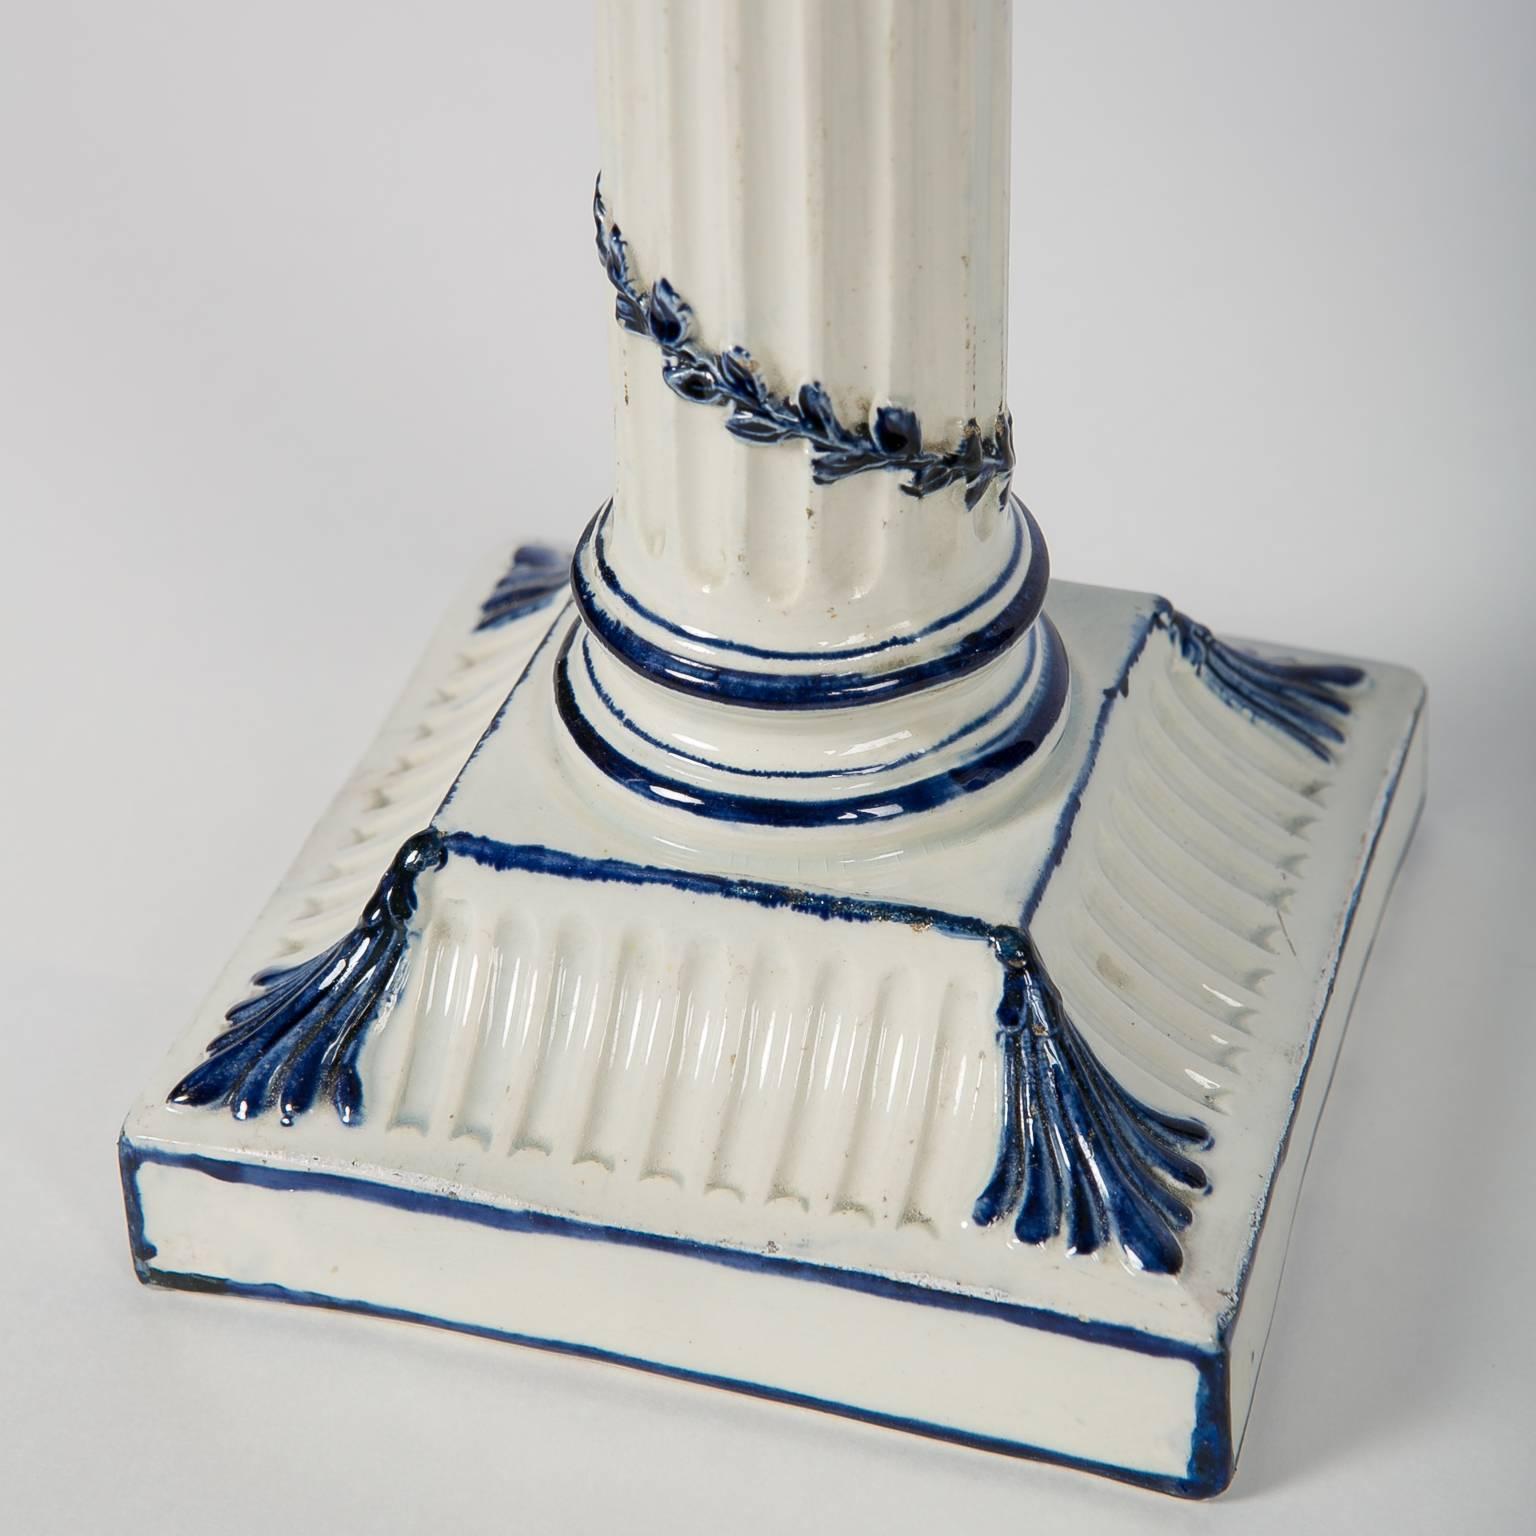 English Wedgwood Blue and White Candlesticks with Neoclassical Design